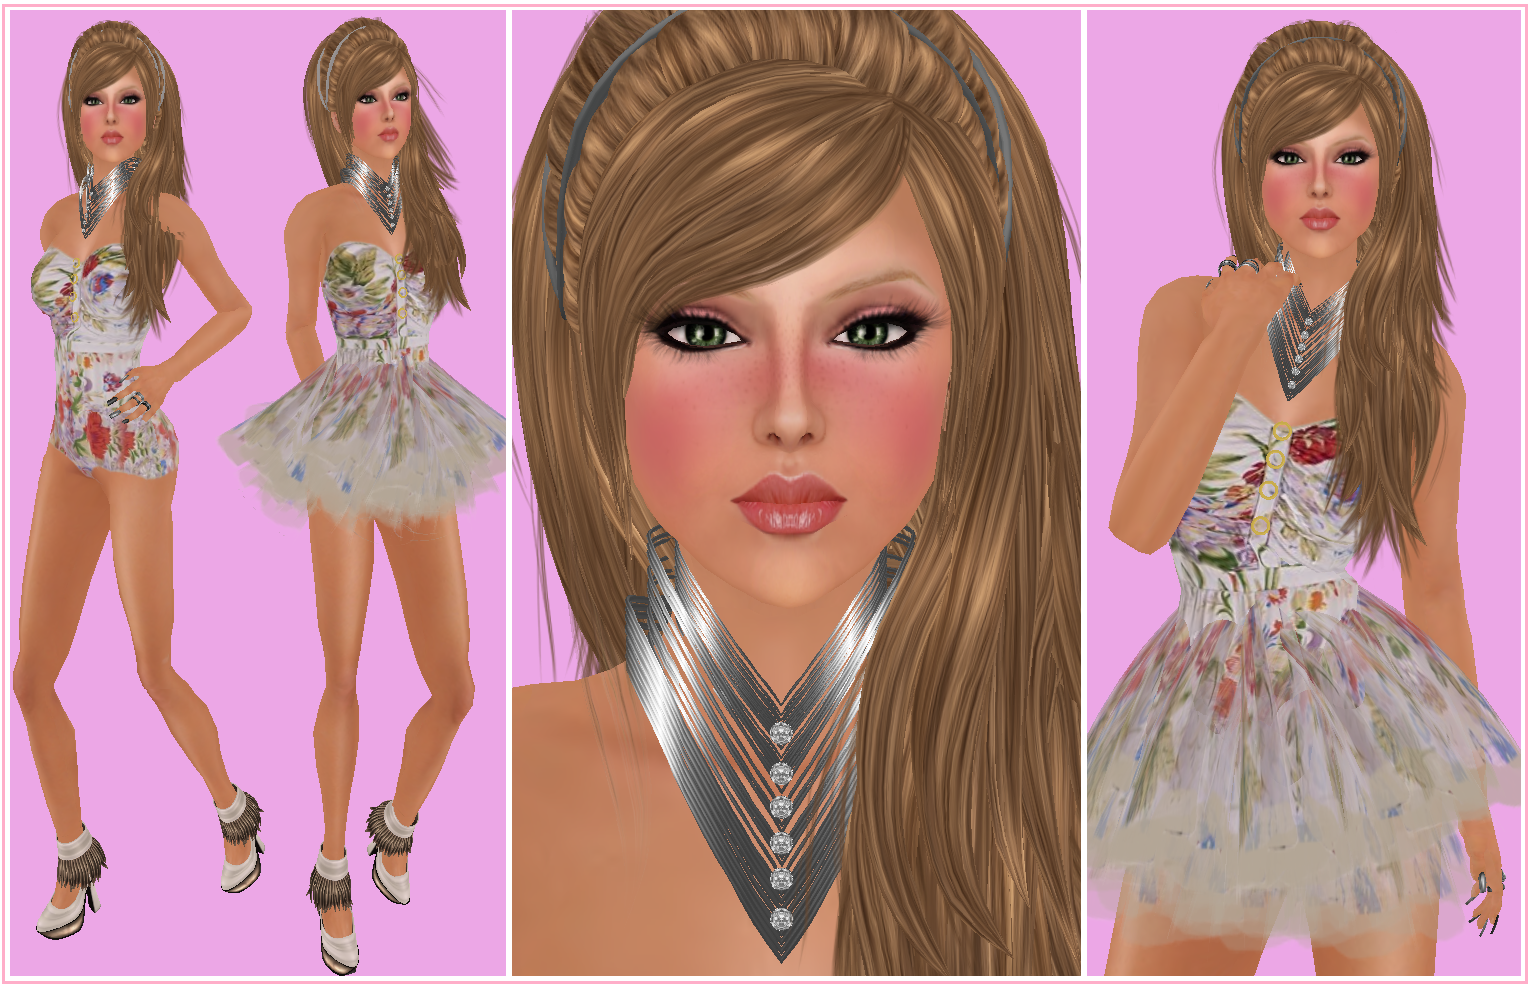  Jewelry, Simply, b.nuts & Pretty Stick Plus New Skin from Freckles title=